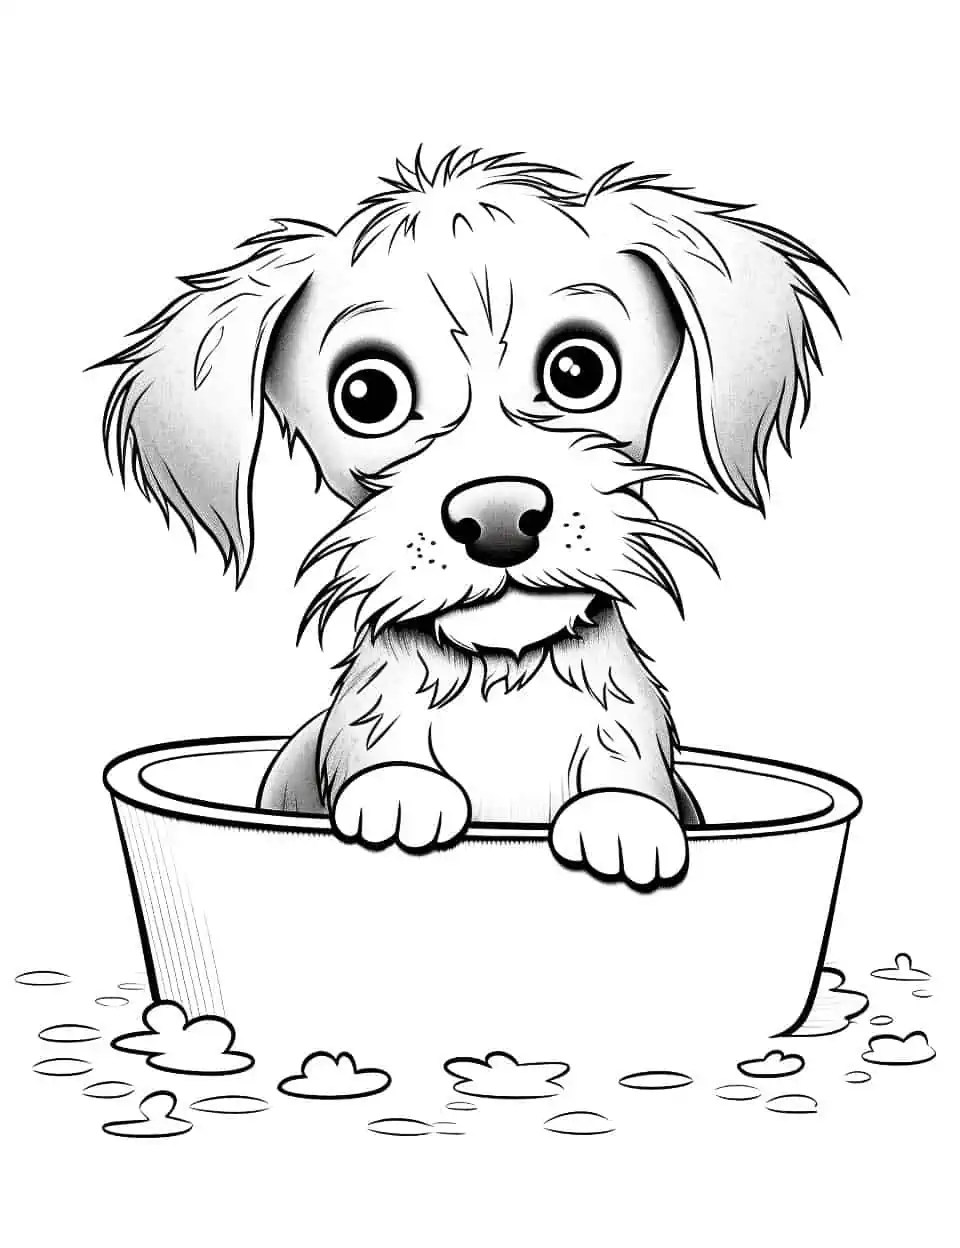 Yorkie Puppy Bath Time Coloring Page - A cute Yorkie puppy's reactions during bath time.